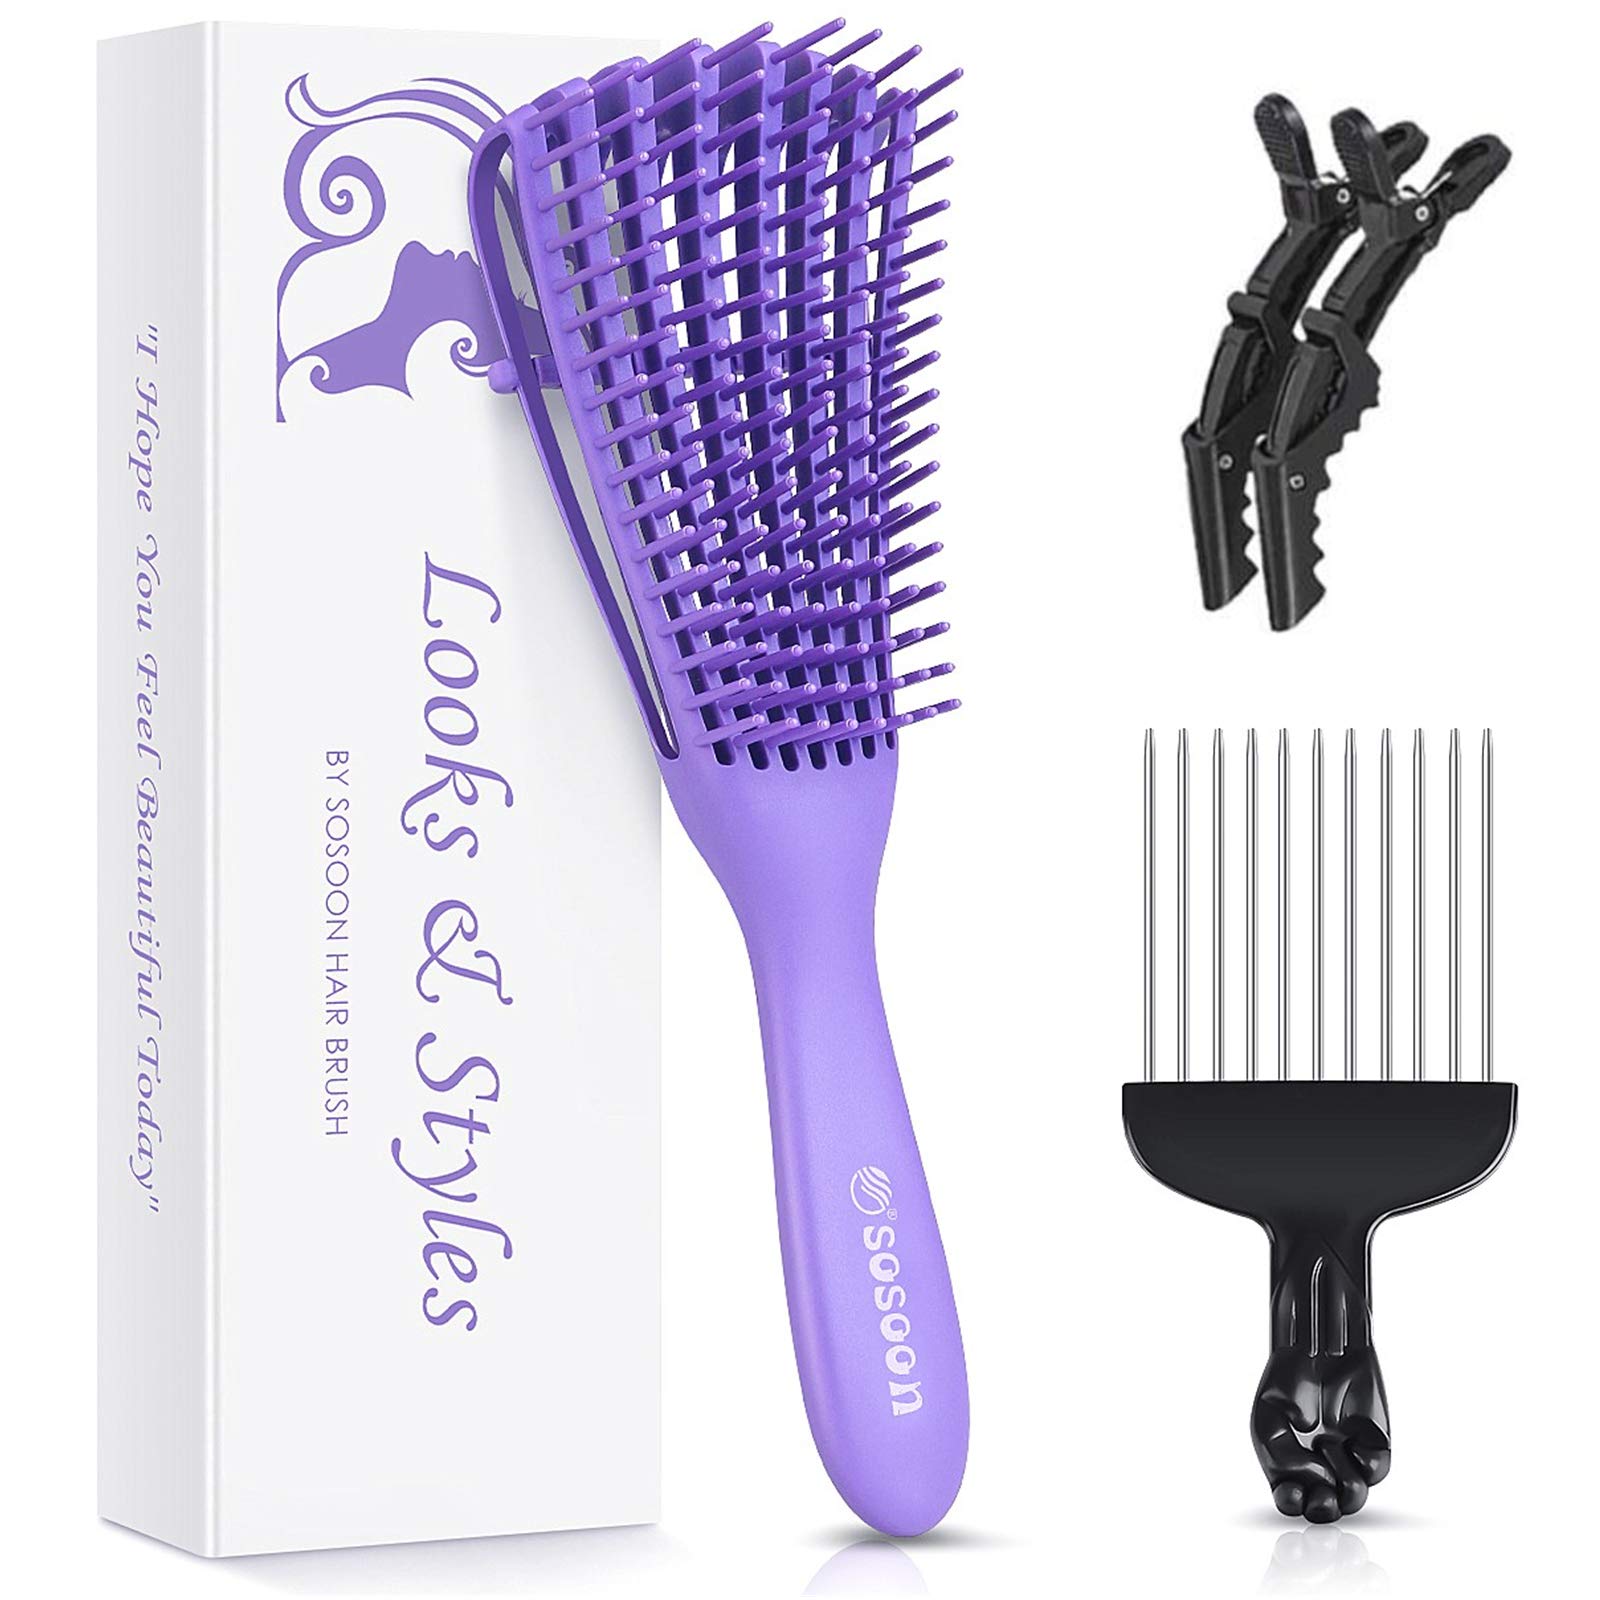 Detangle Hair Brush, Detangler Brush for Women Girls Wet Dry Afro 3a to 4c Thick Frizzly Wavy Kinky Curly Coily Natural Hair, Detangling Hairbrush with Metal Pick Comb, Purple